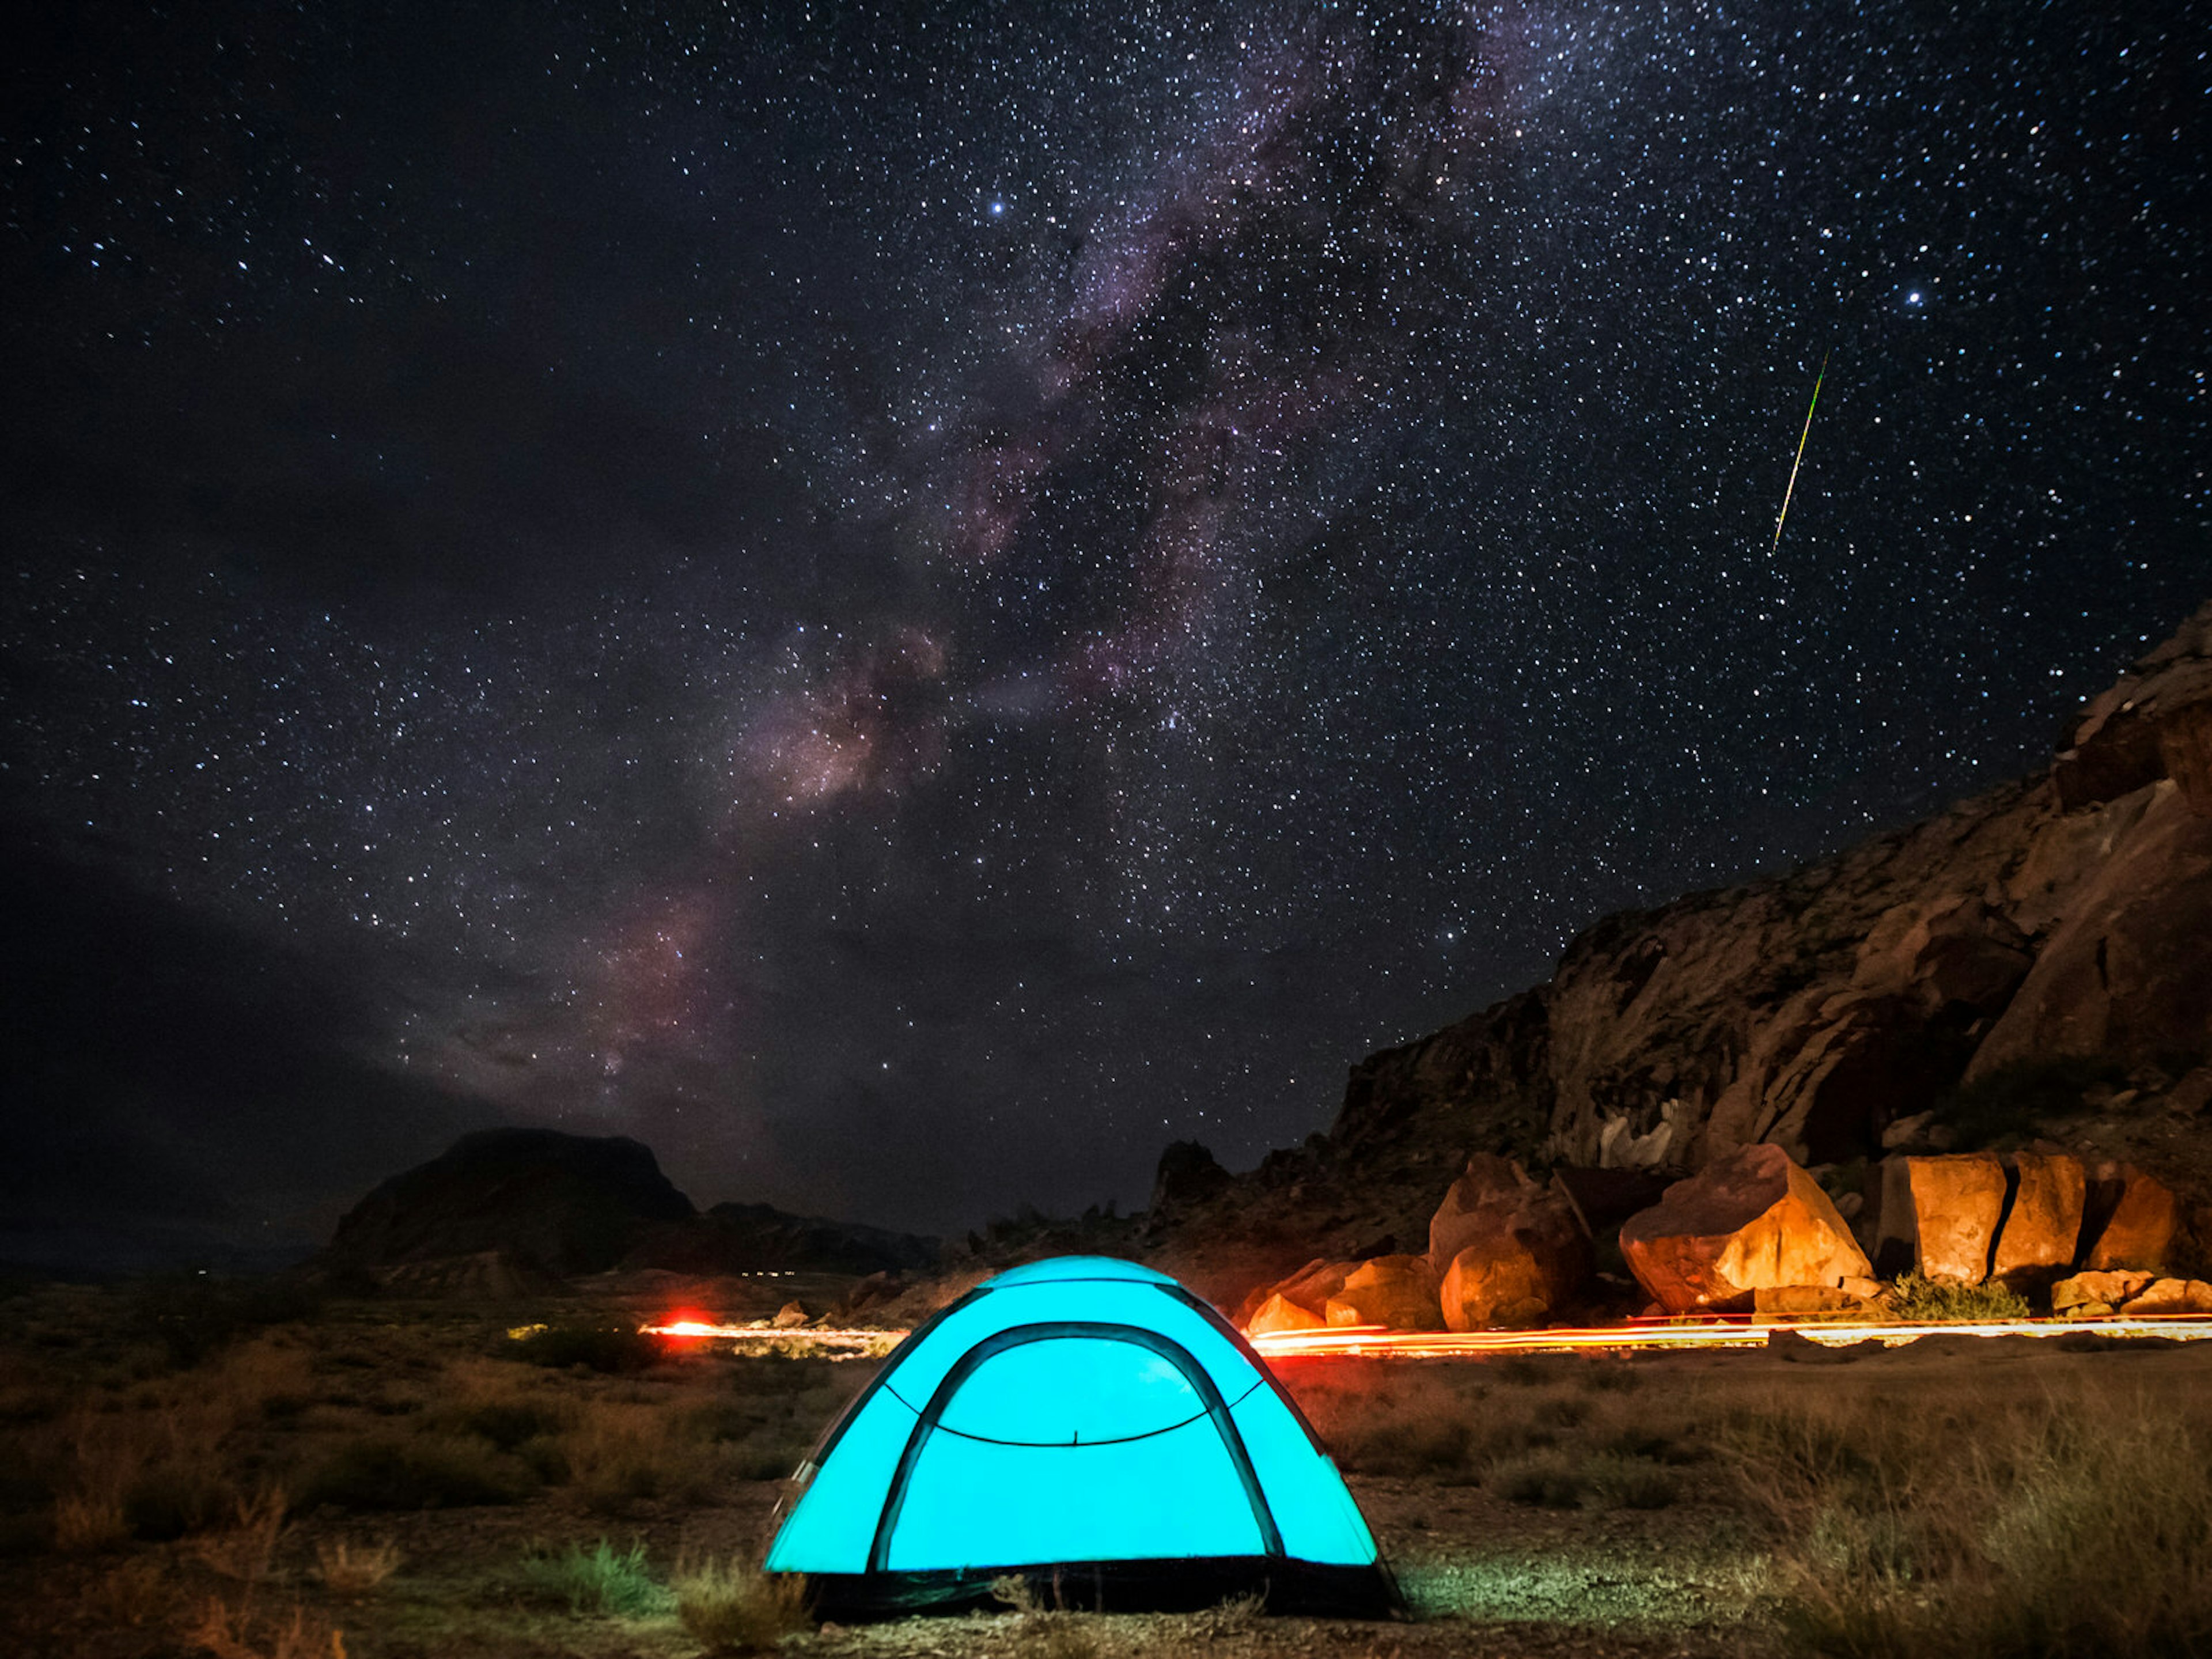 Milky Way, stars and a falling star over a blue tent